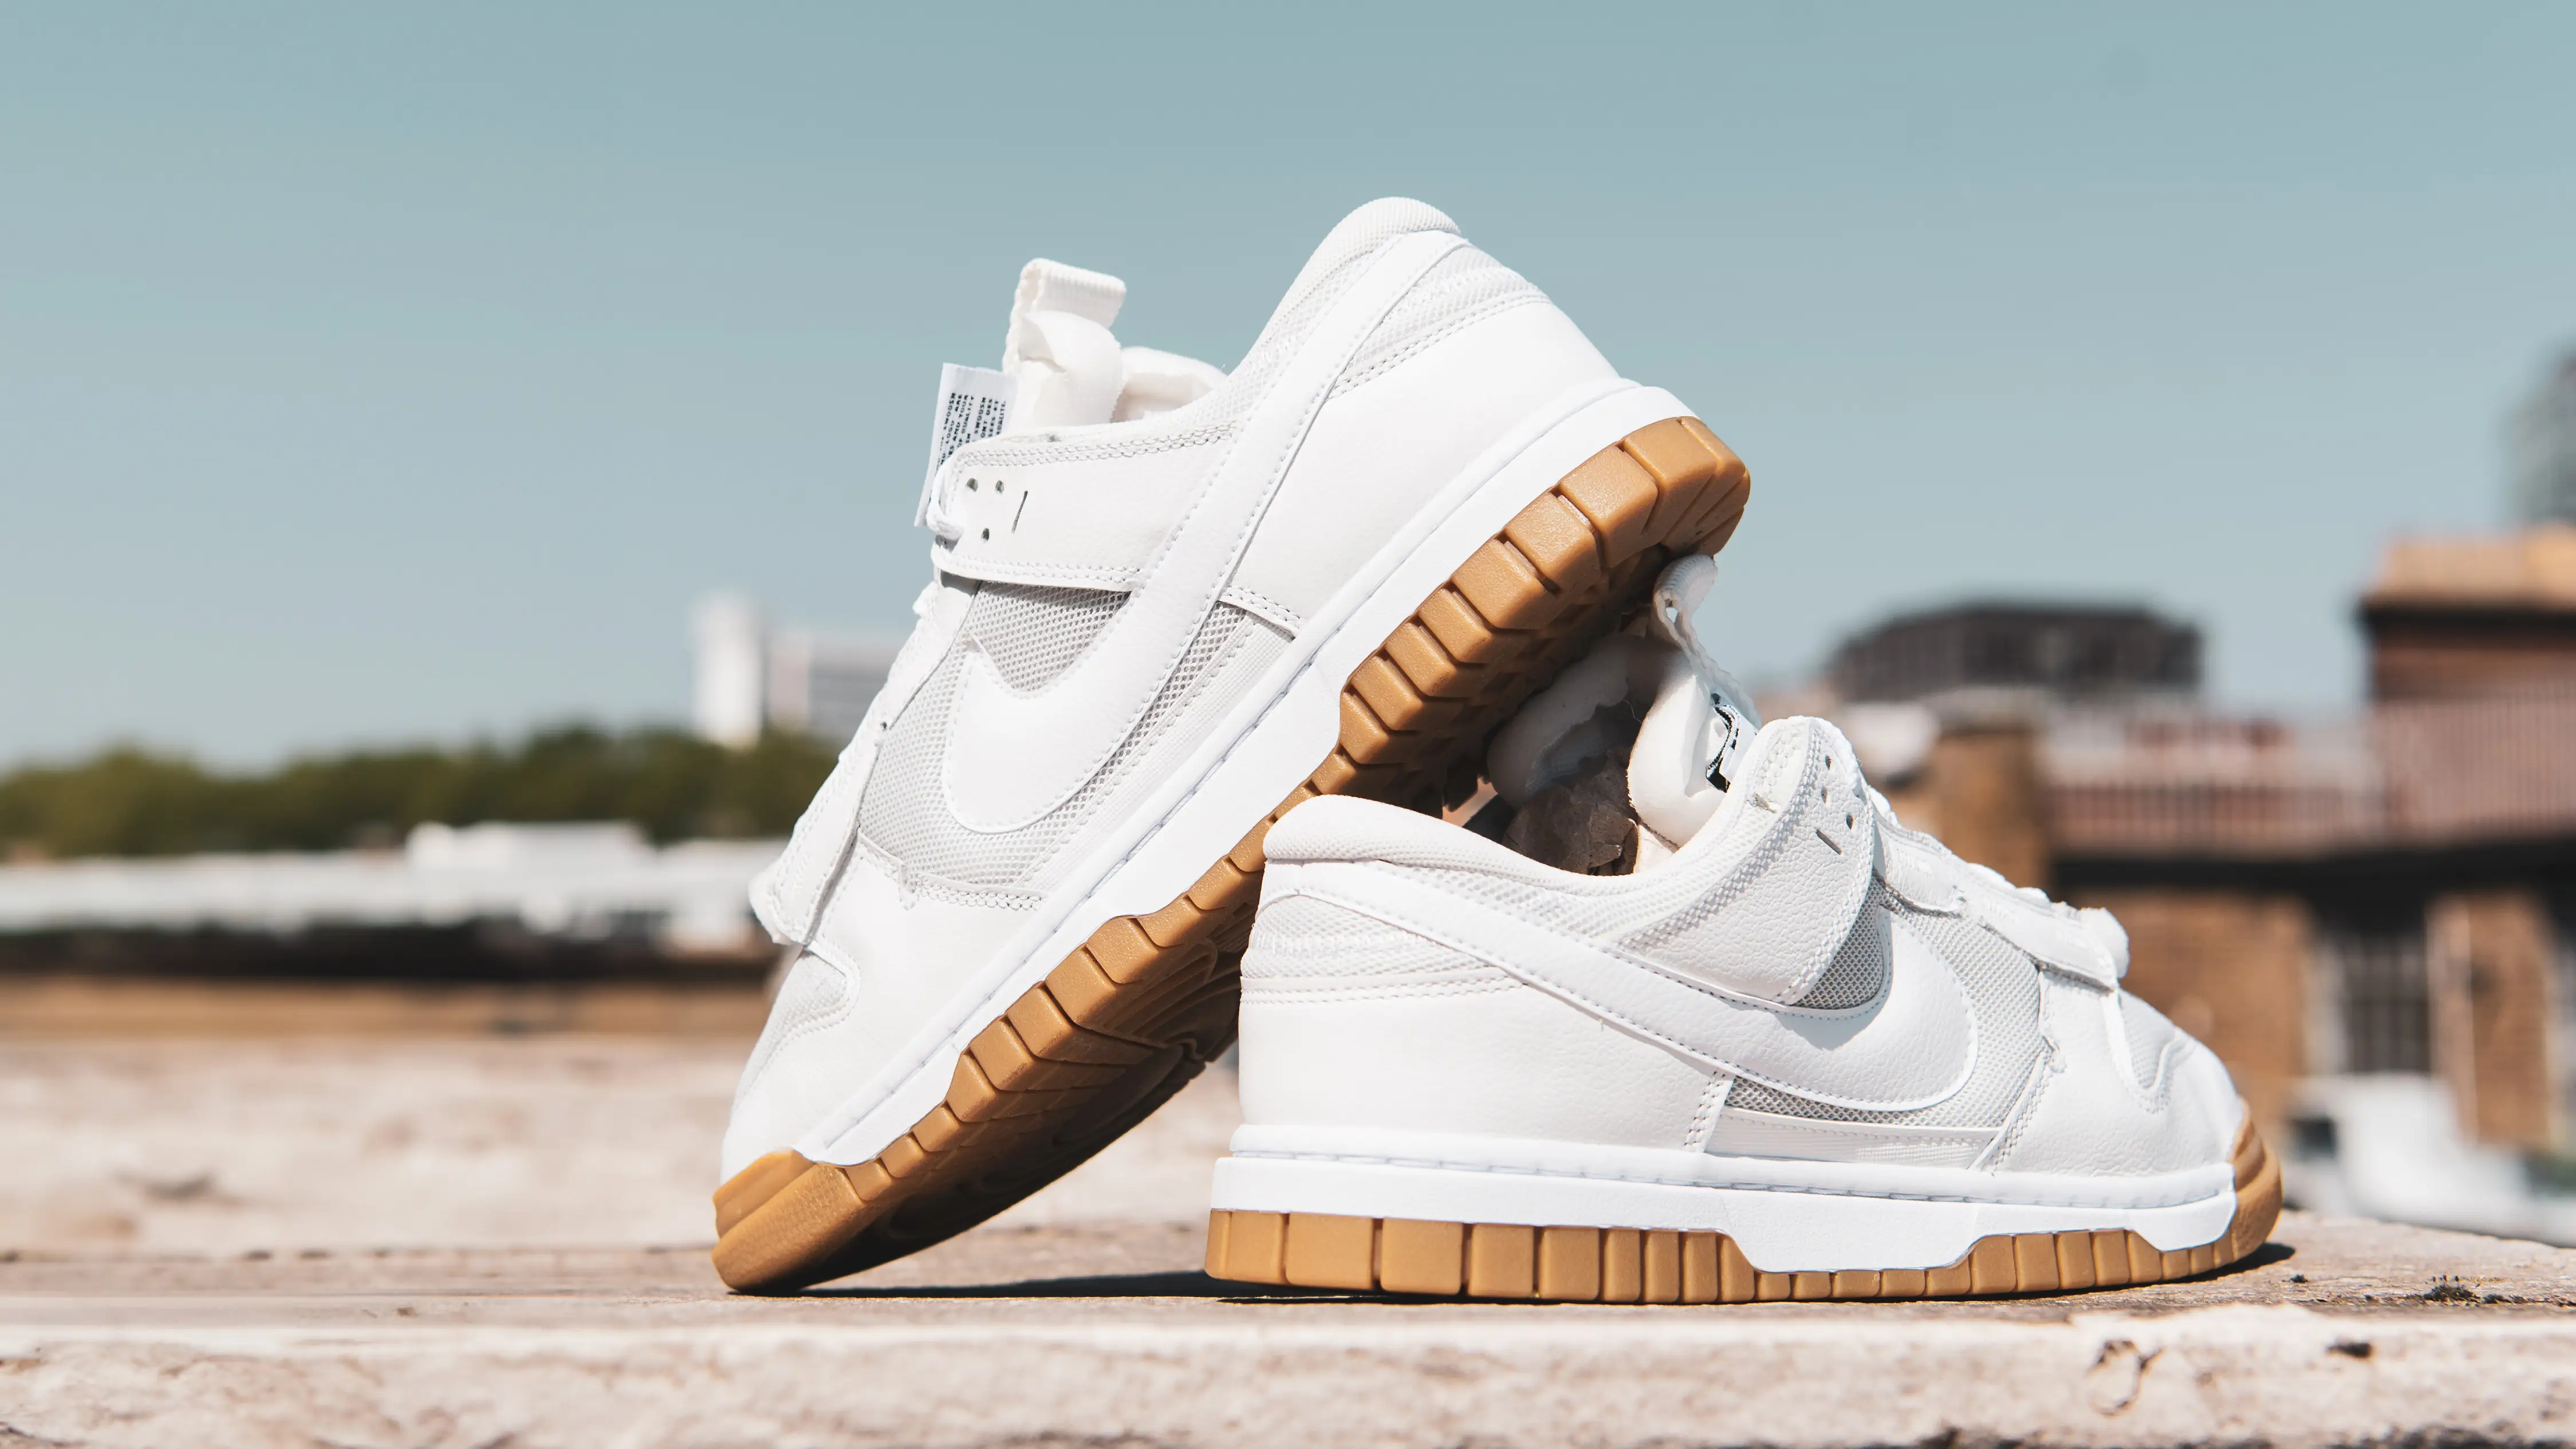 The Nike Air Dunk Jumbo Puts An Exaggerated Twist On a Classic